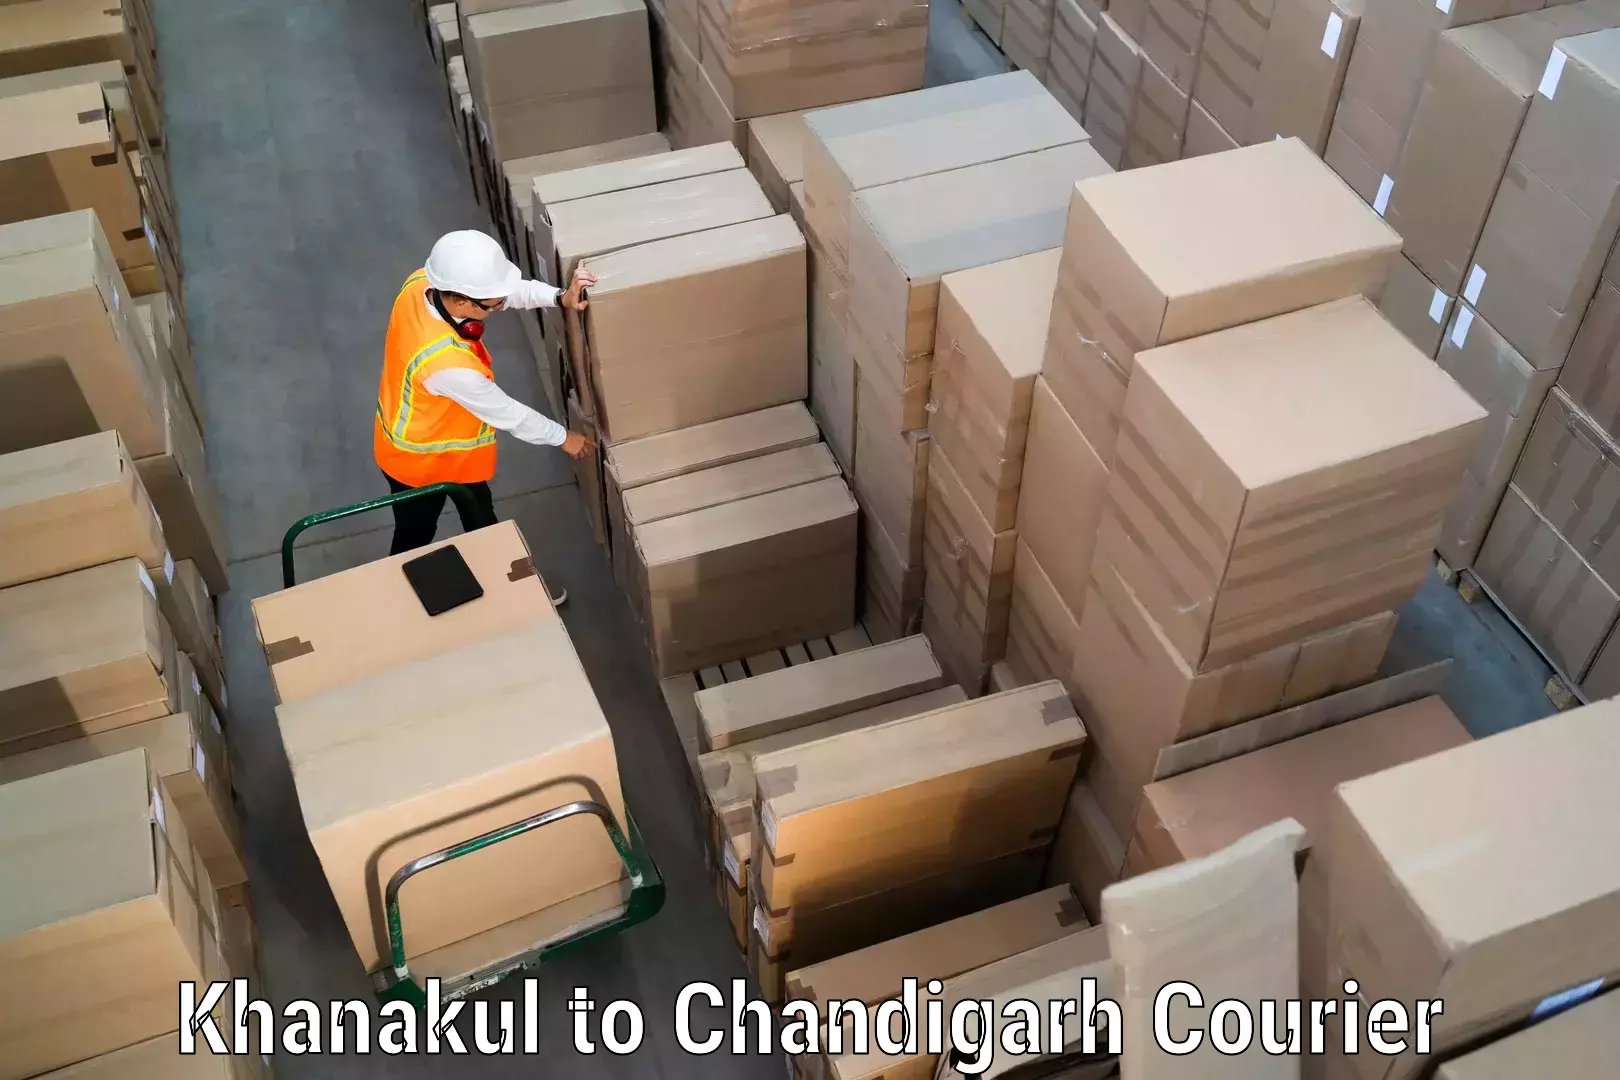 Cash on delivery service Khanakul to Chandigarh